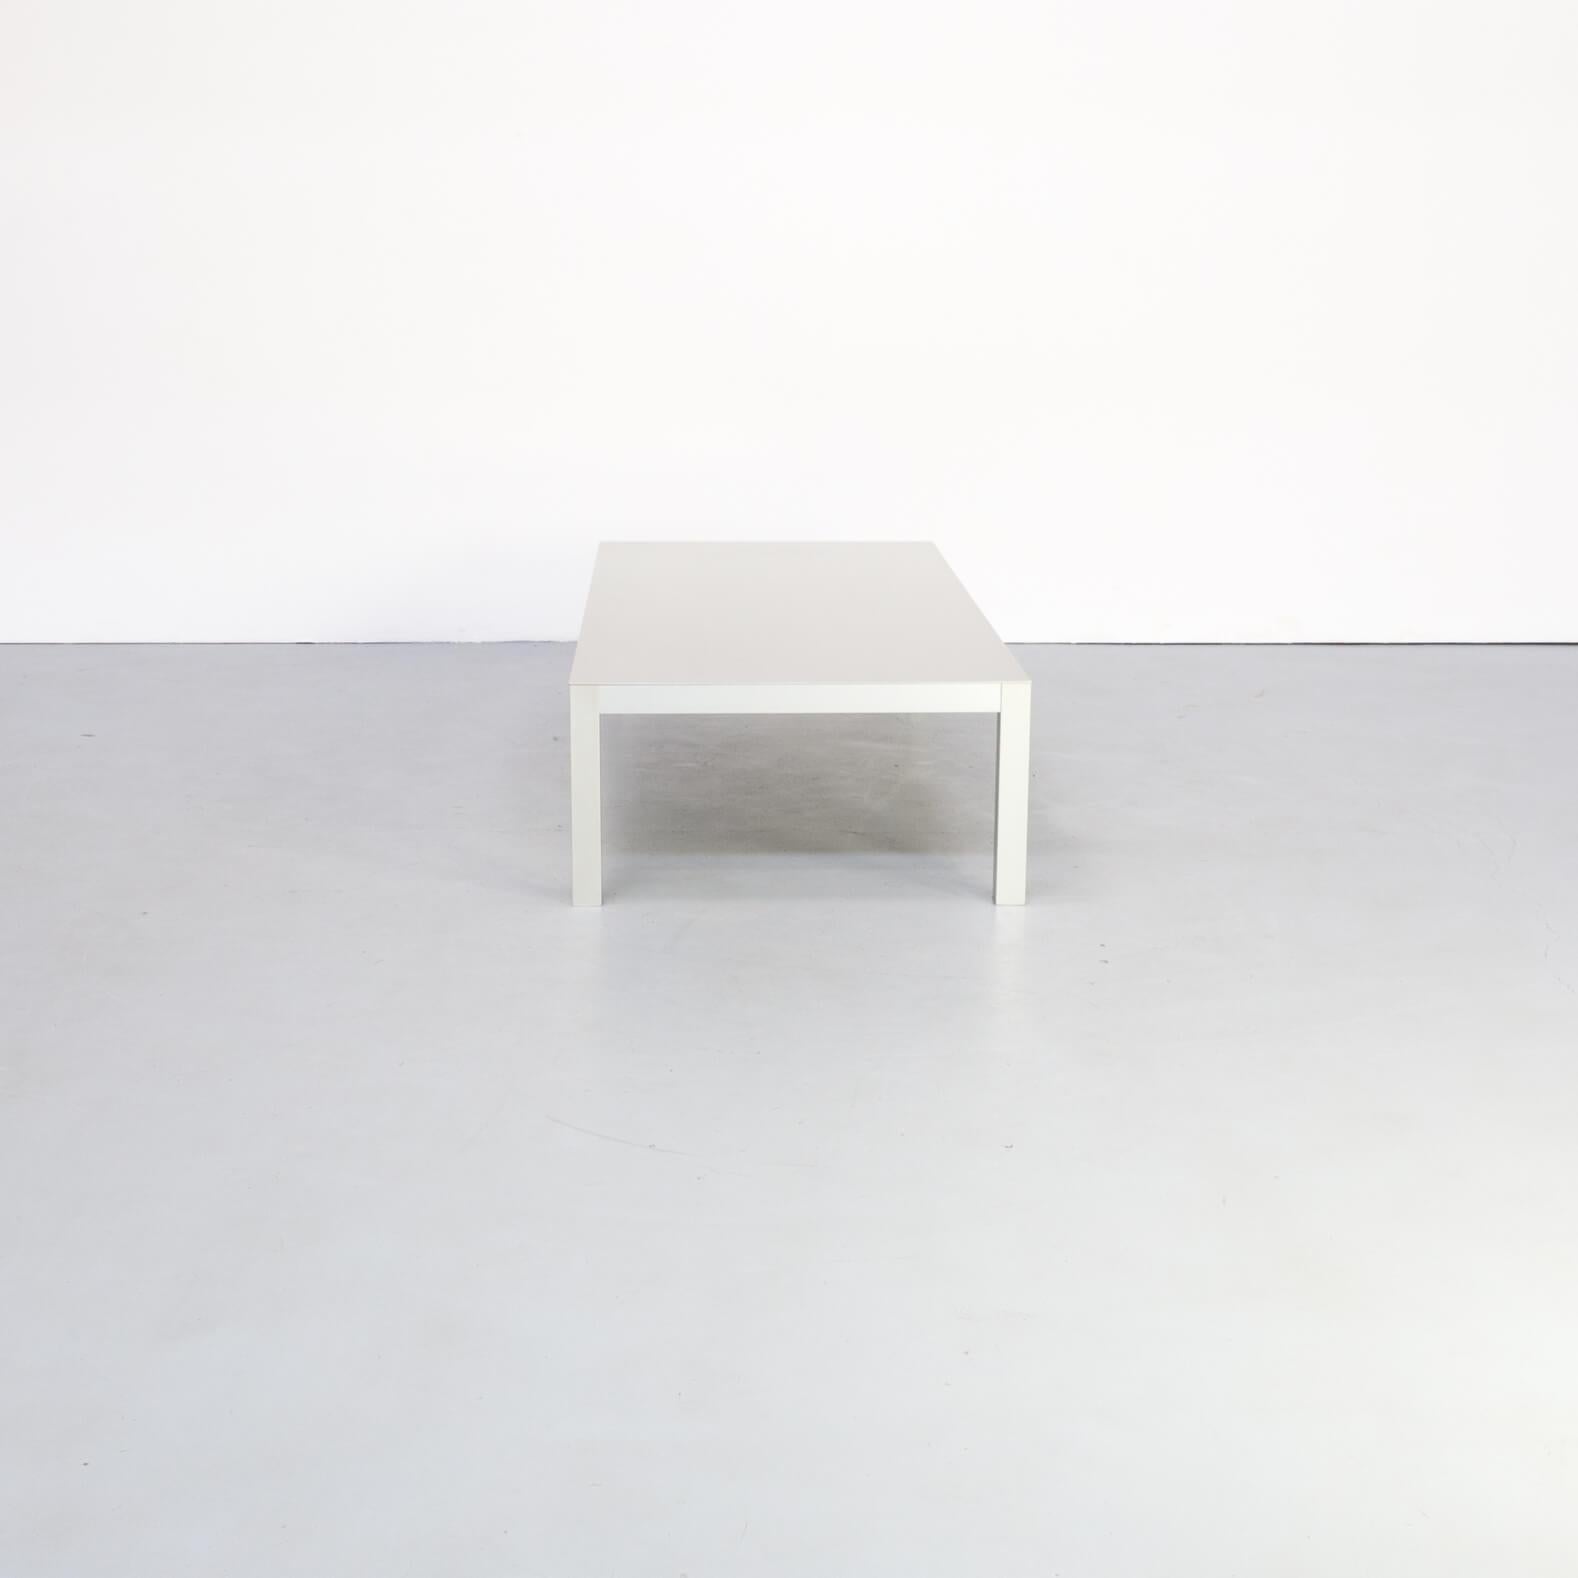 The LIM table was designed by Bruno Fattorini for MDF Italia and is a modern Minimalist designed table. The coffee table is special because of its simplicity. An extraordinarily slim design that, thanks to a unique construction and material